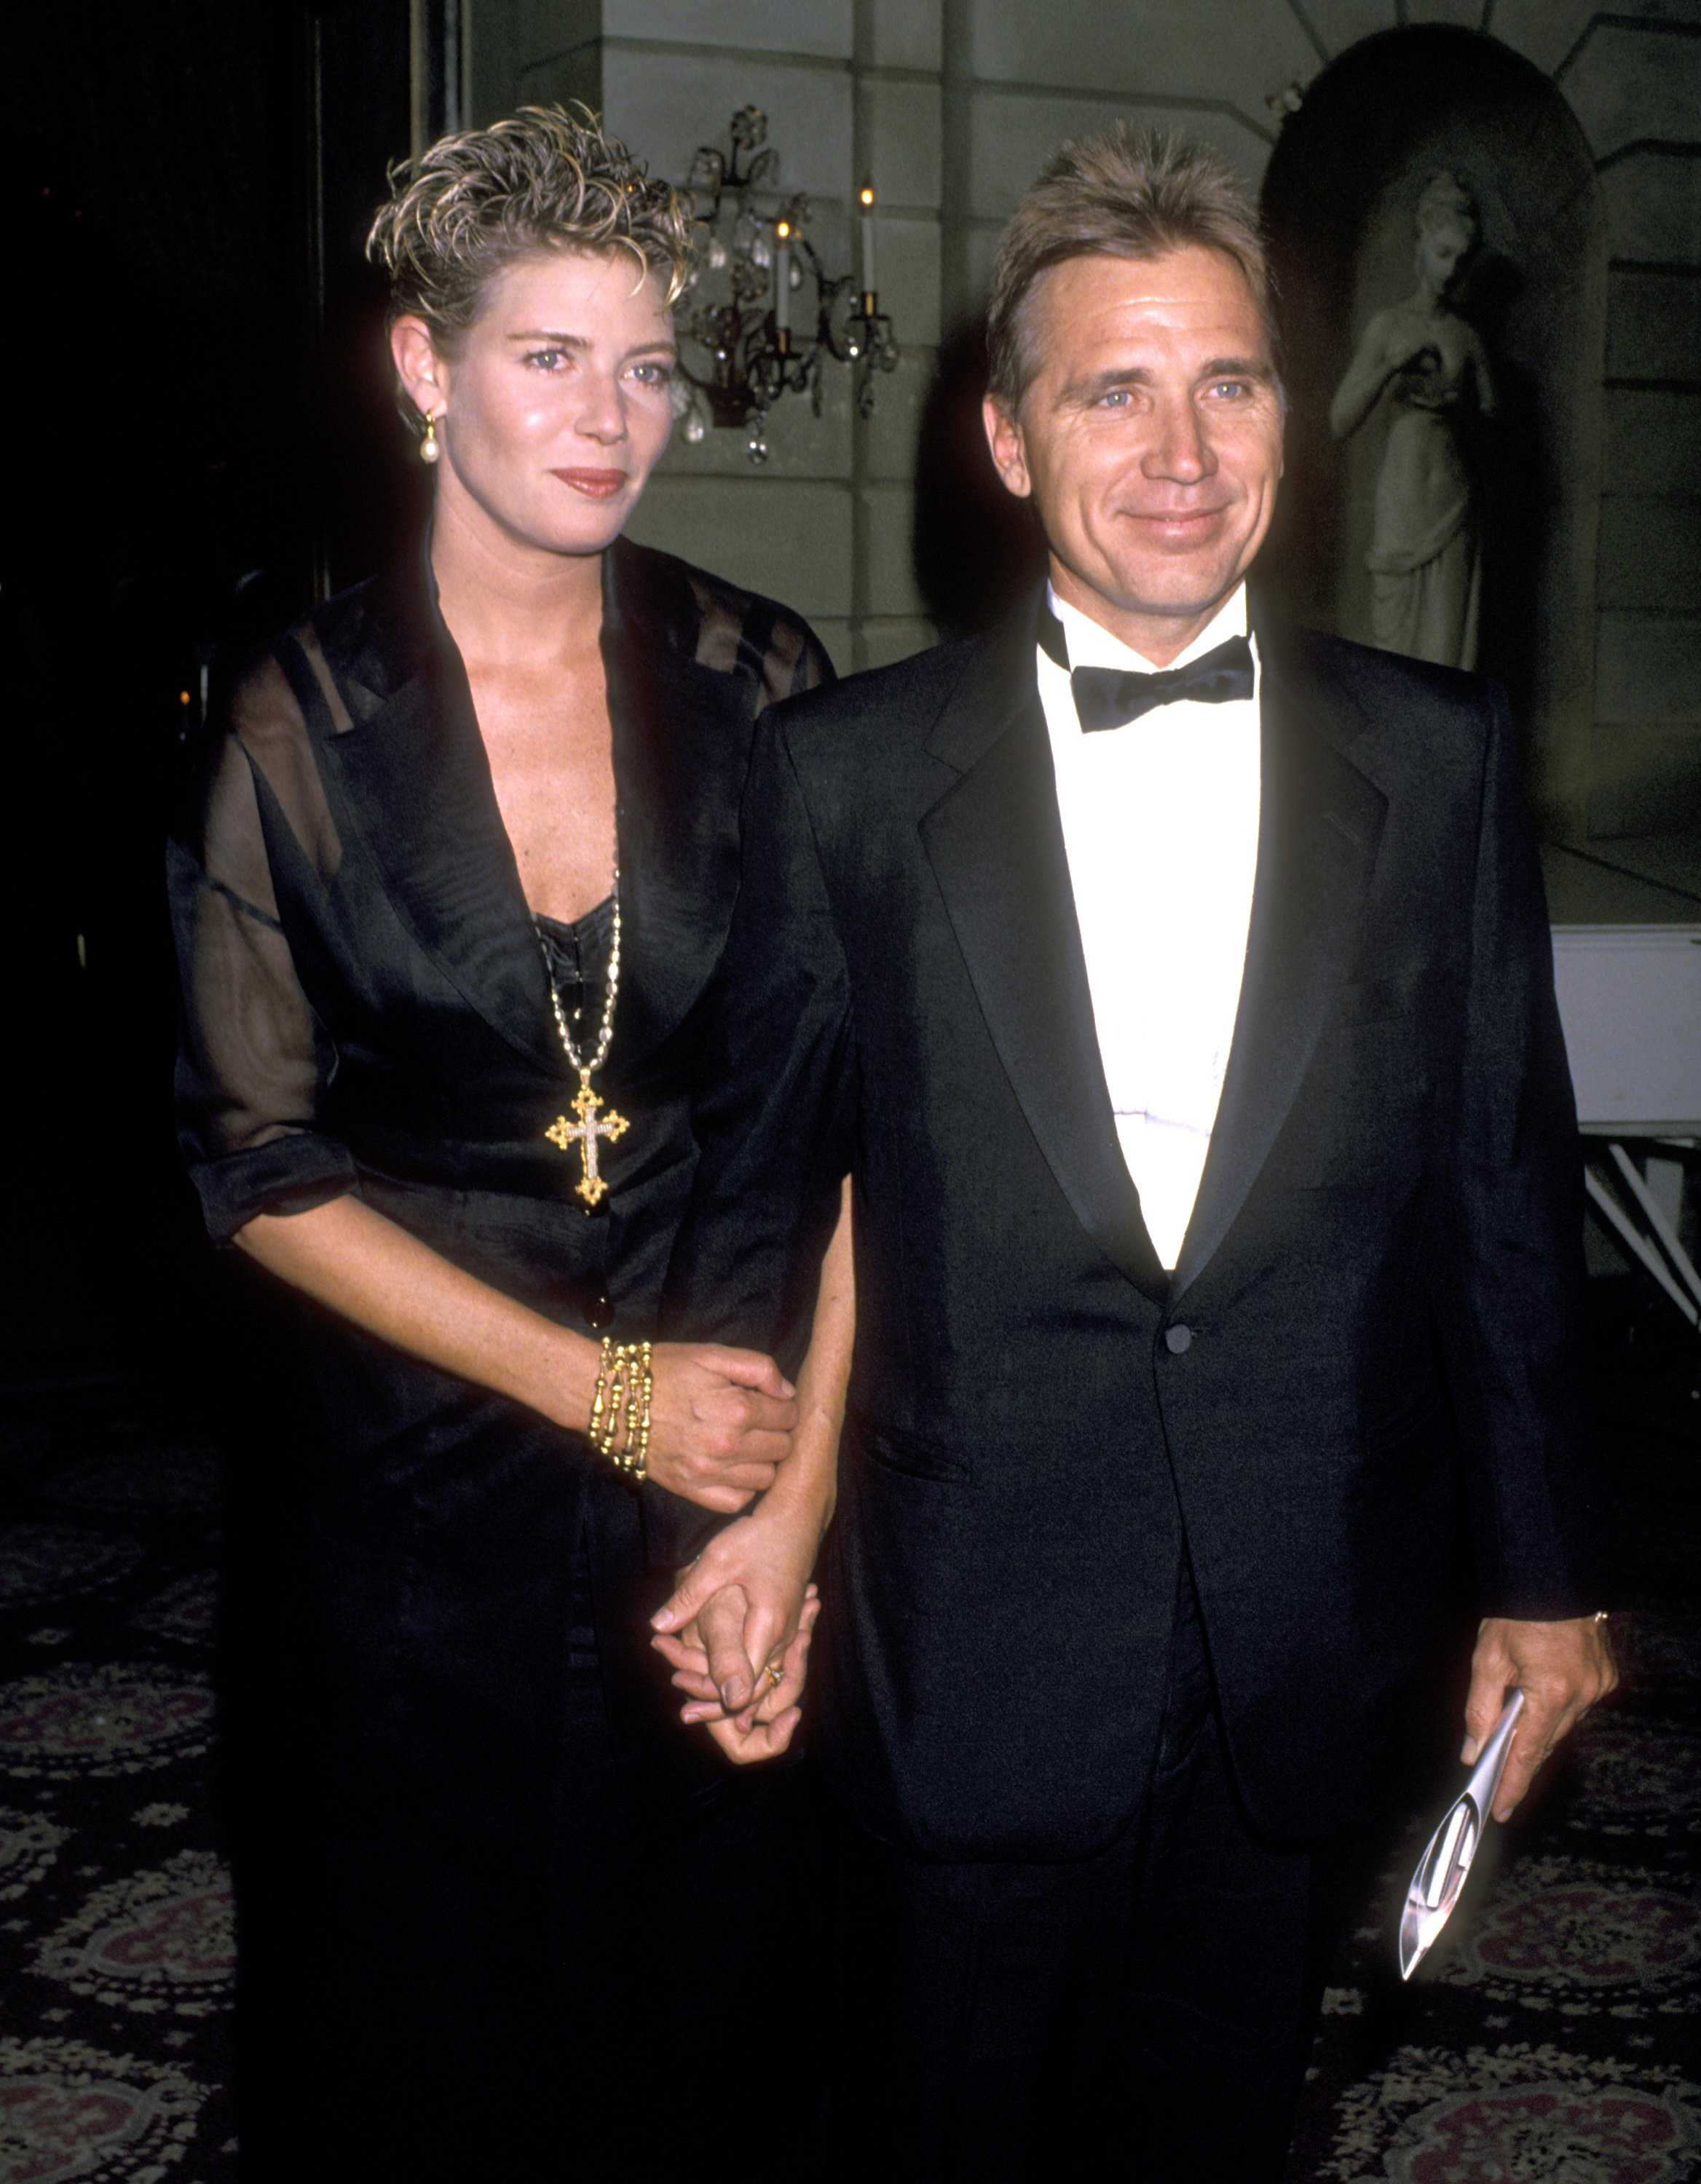 Actress Kelly McGillis and husband Fred Tillman attend The Acting Company's John Houseman Awards Gala on April 17, 1989 at Pierre Hotel in New York City, New York. | Source: Getty Images